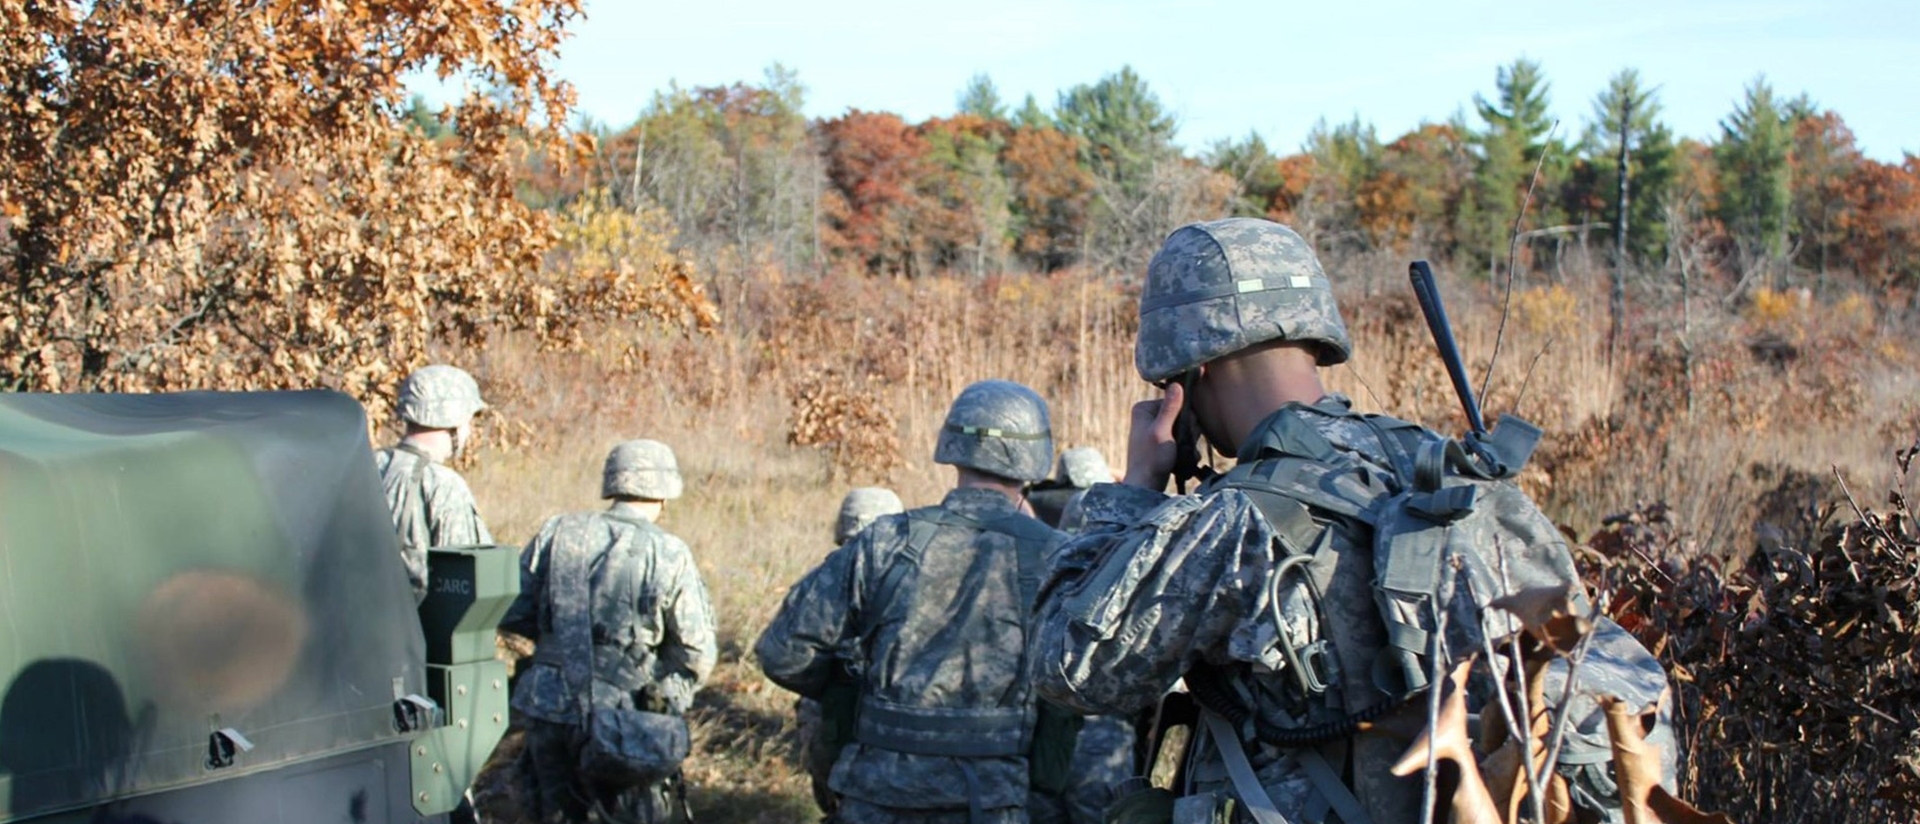 ROTC students training in the field